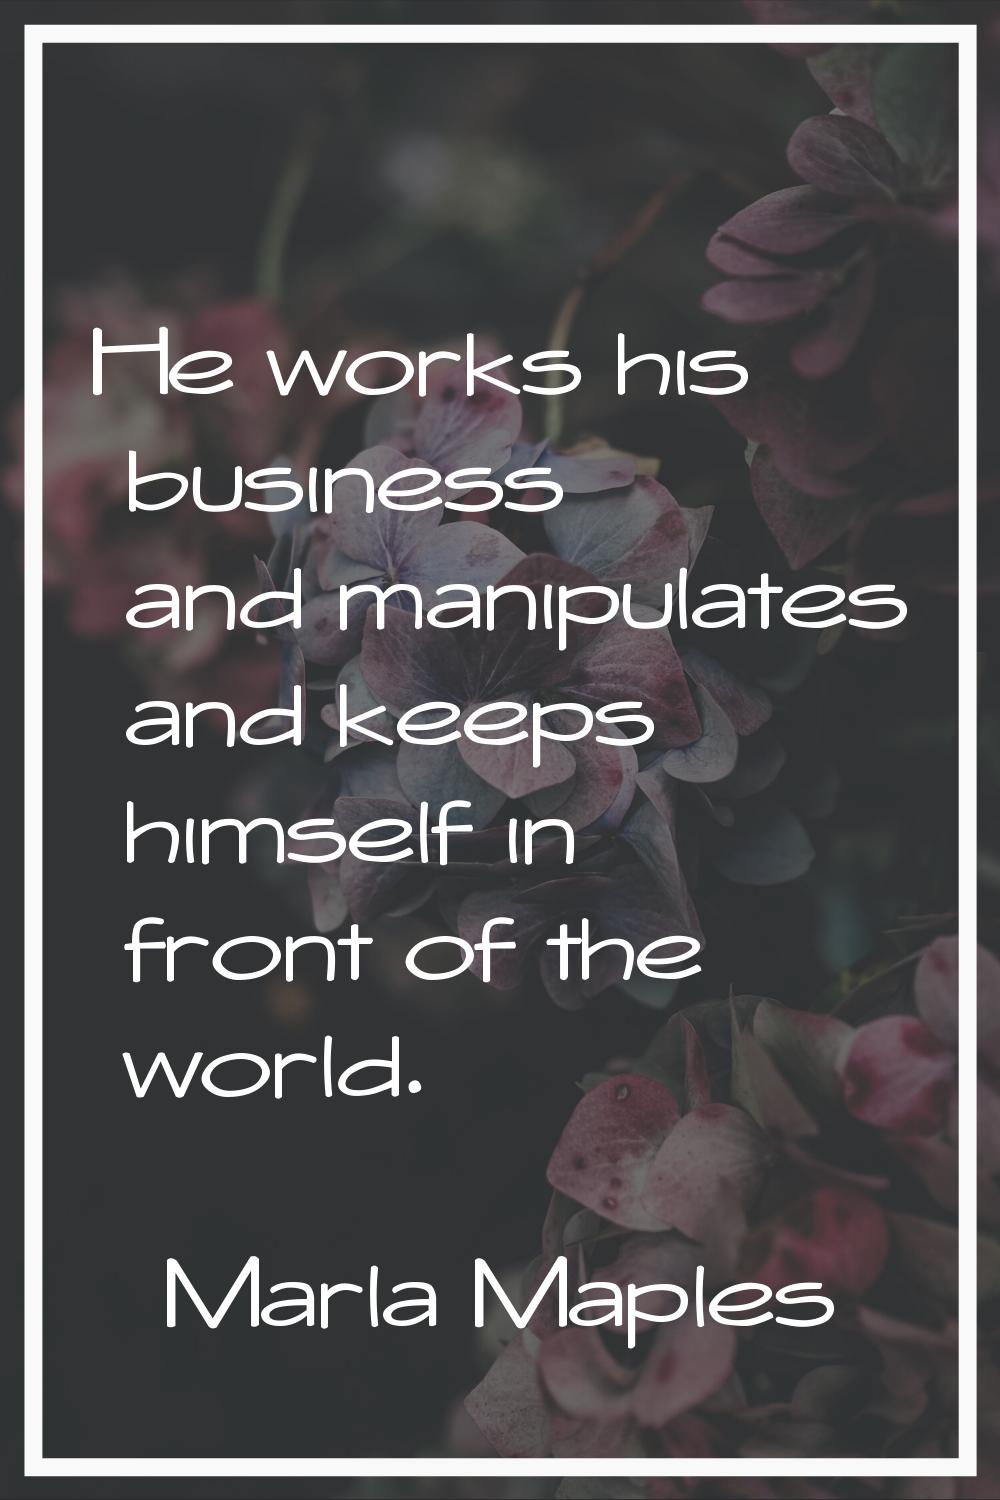 He works his business and manipulates and keeps himself in front of the world.